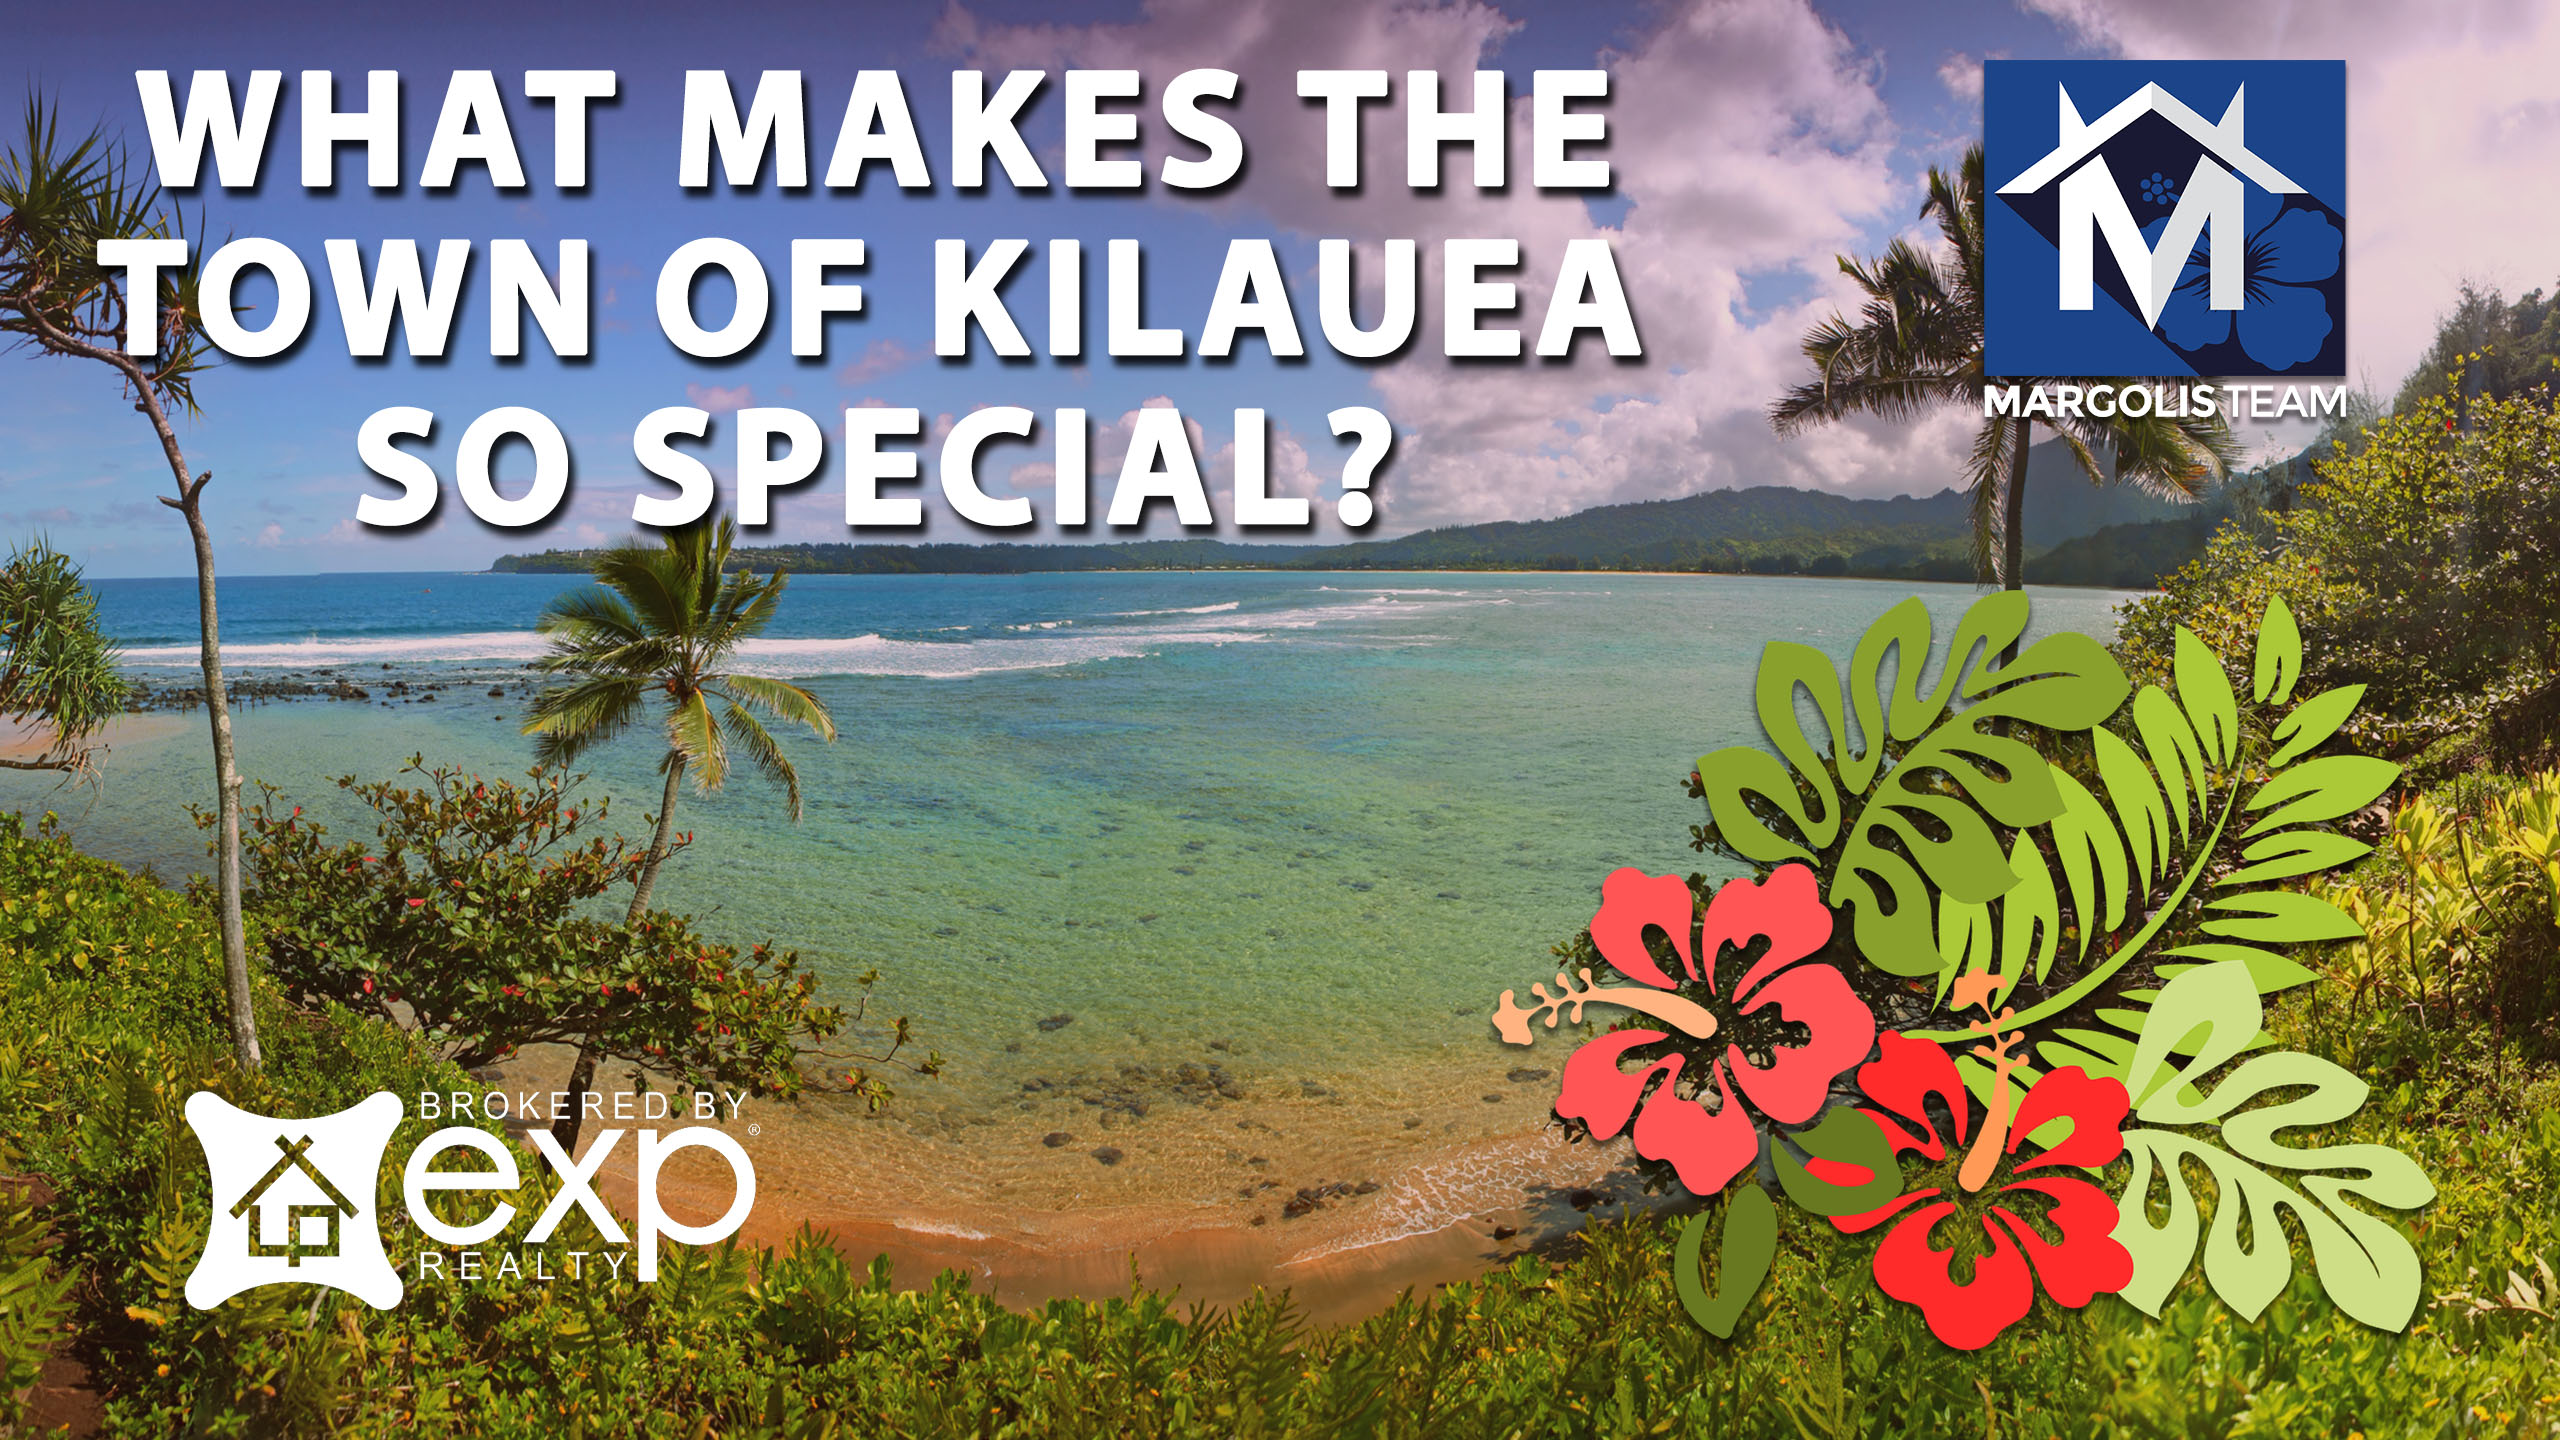 What Makes the Town of Kilauea So Special?